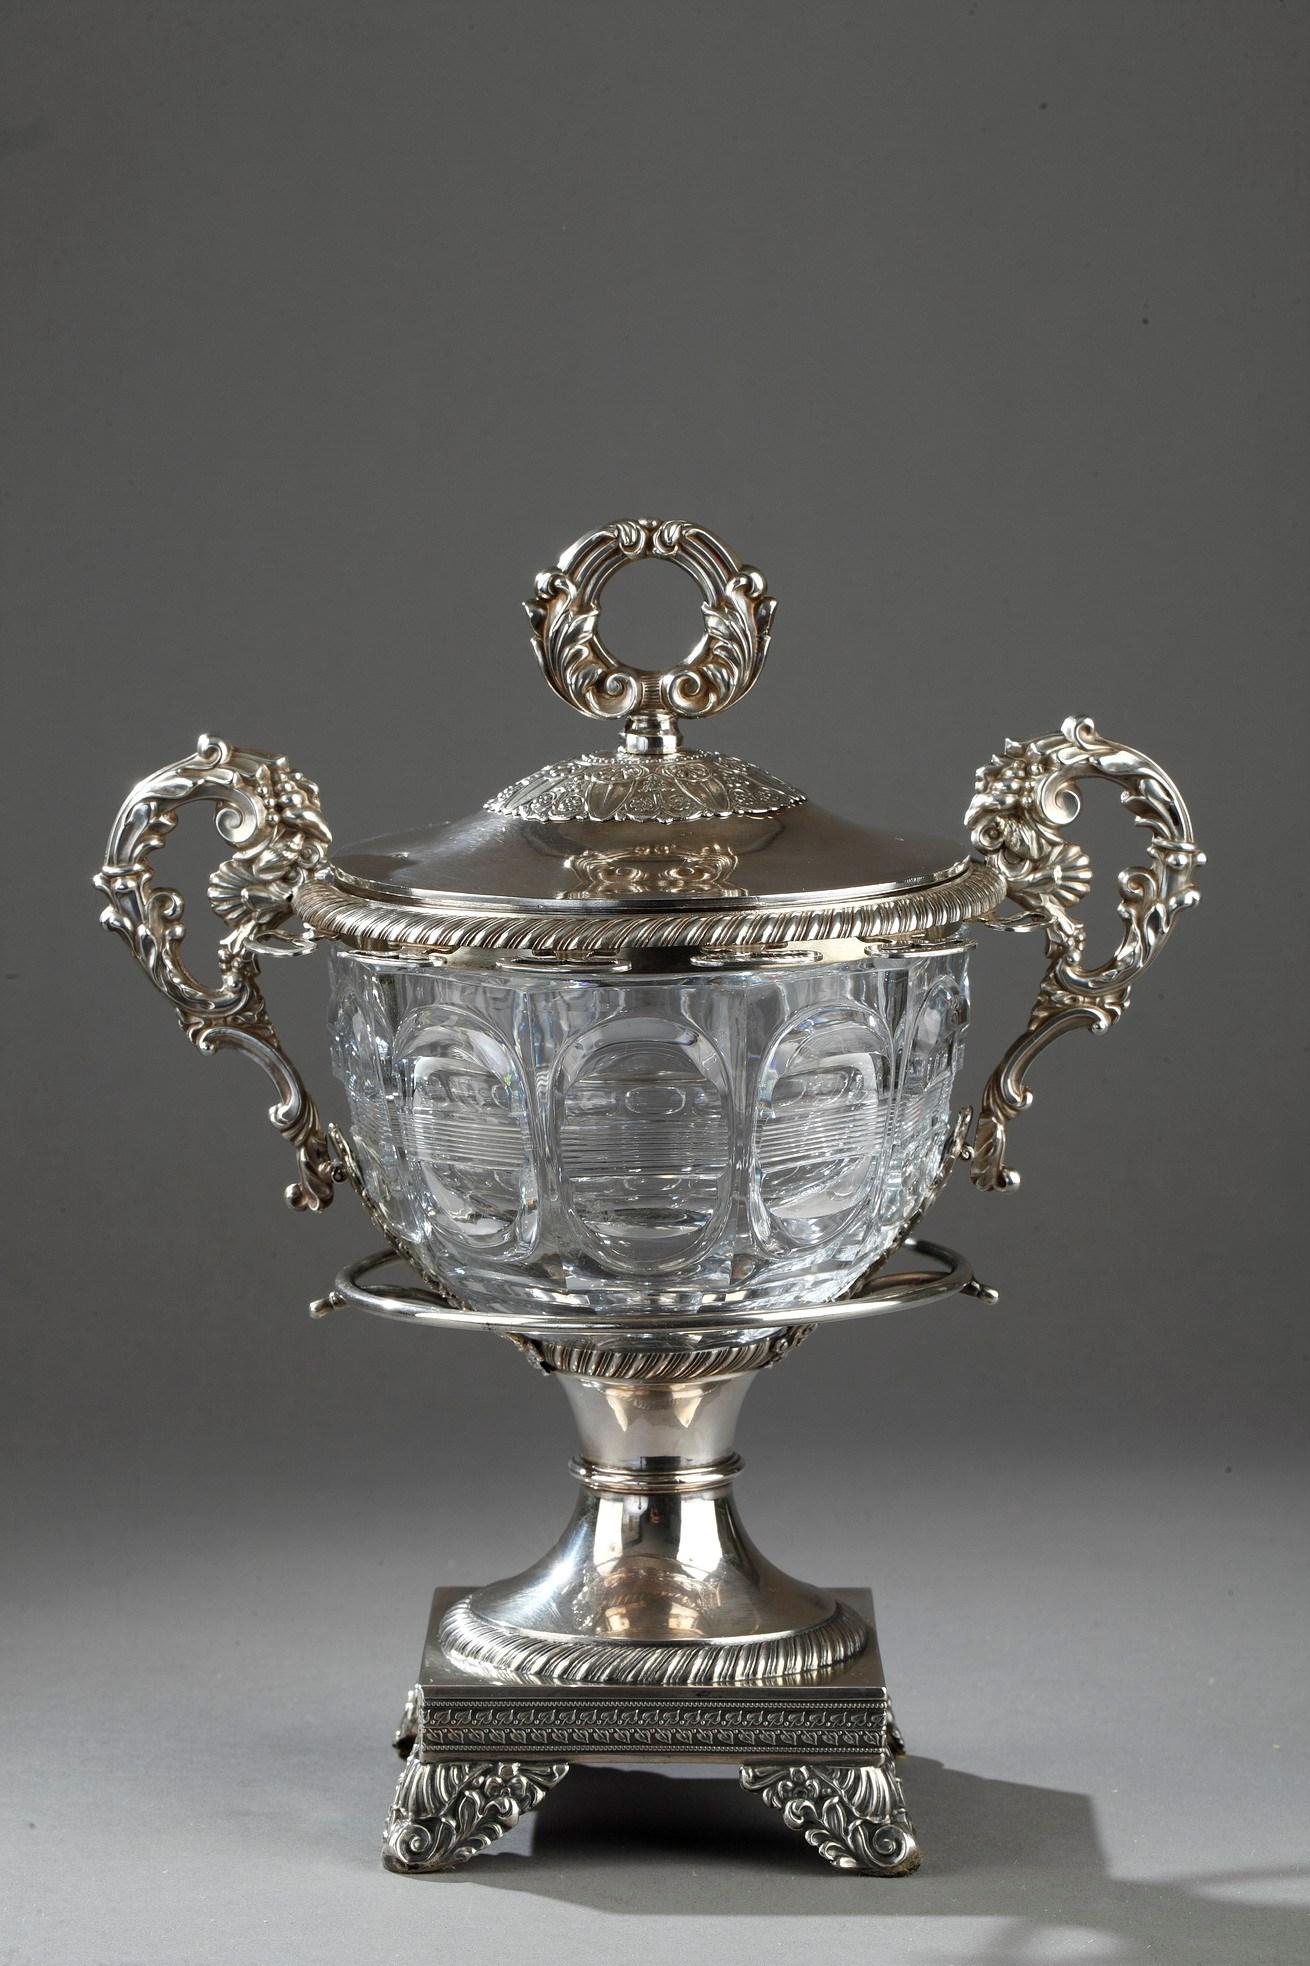 Silver and cut-crystal confiturier decorated with geometrical patterns.The silver frame is adorned with laurel leaves and stylized palmettes. The handles are decorated with acanthus leaves, seeds and shells forming a cornucopia. Twelve vermeil